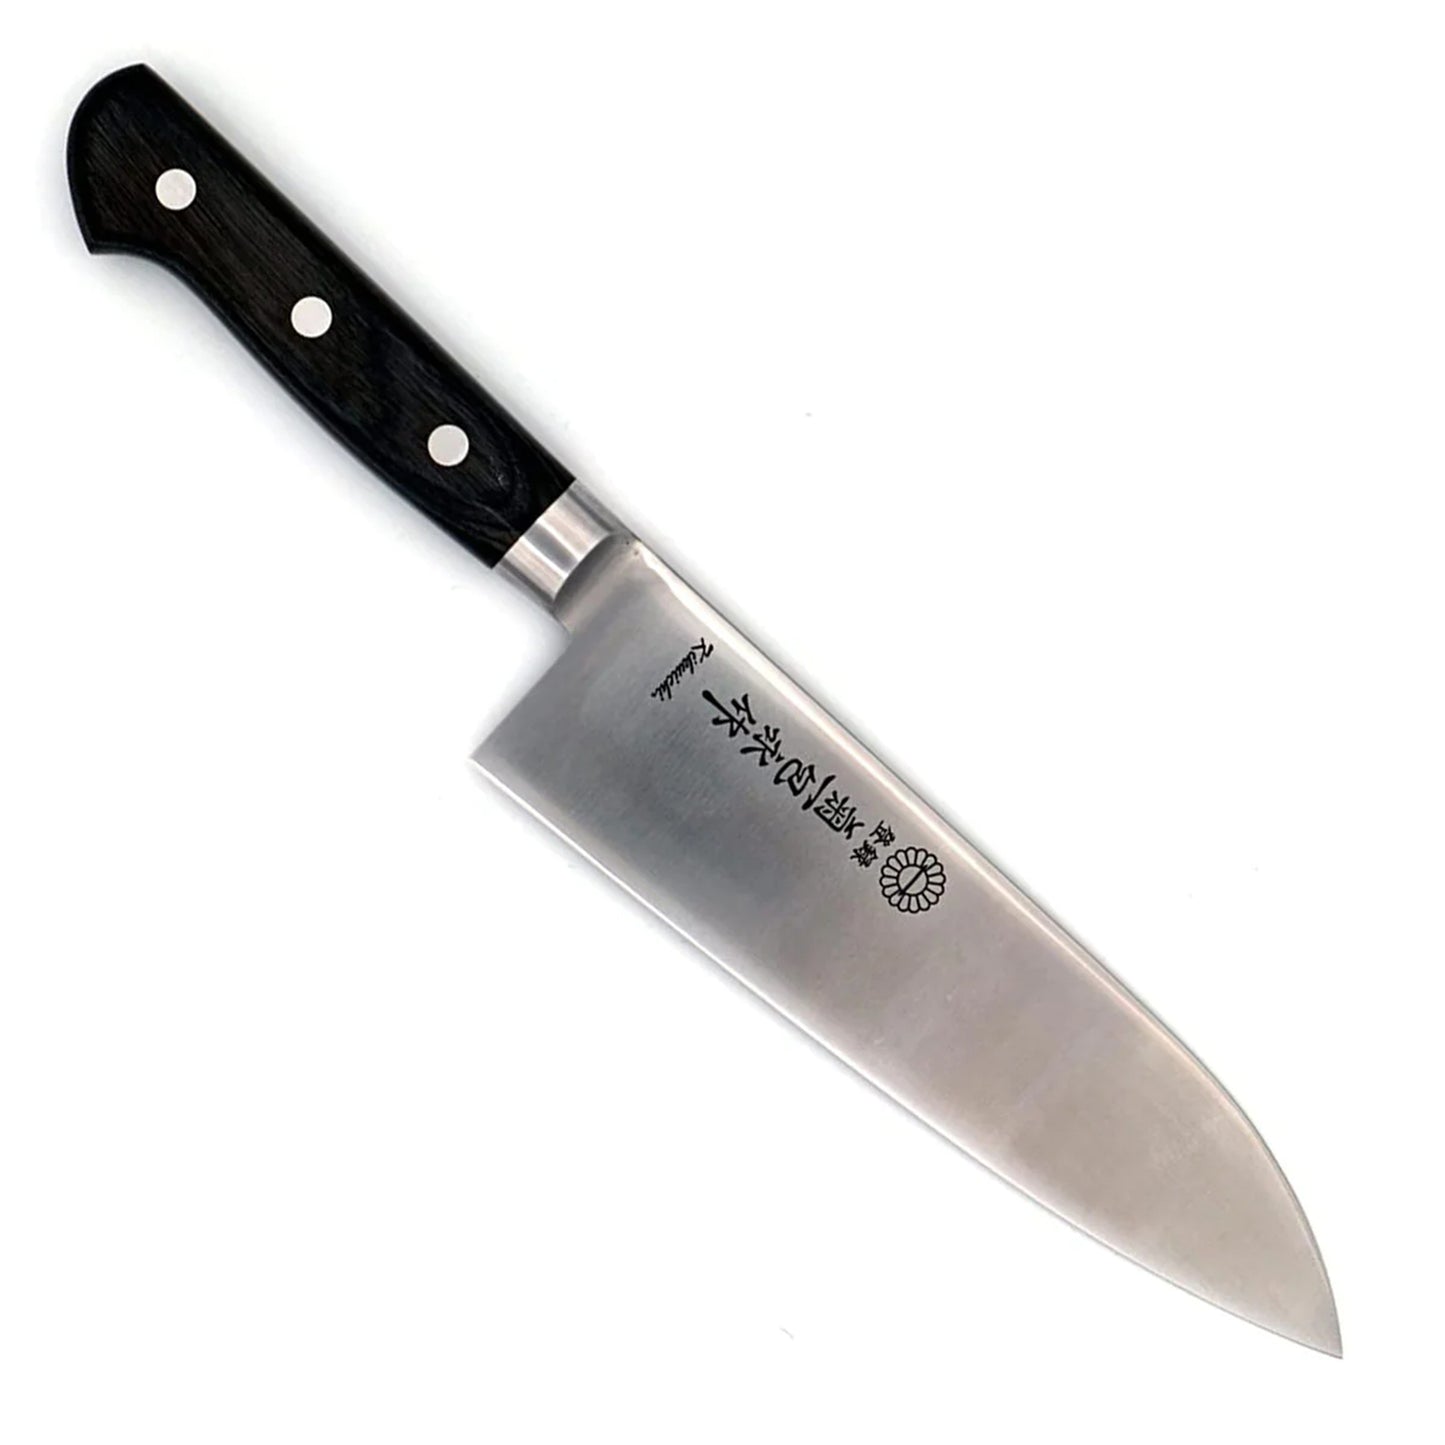 The Kikuichi SEM Series Semi-Stainless Santoku Knife, a versatile and reliable kitchen tool designed to excel at the three essential cutting tasks a Santoku knife is known for: slicing, dicing, and mincing.